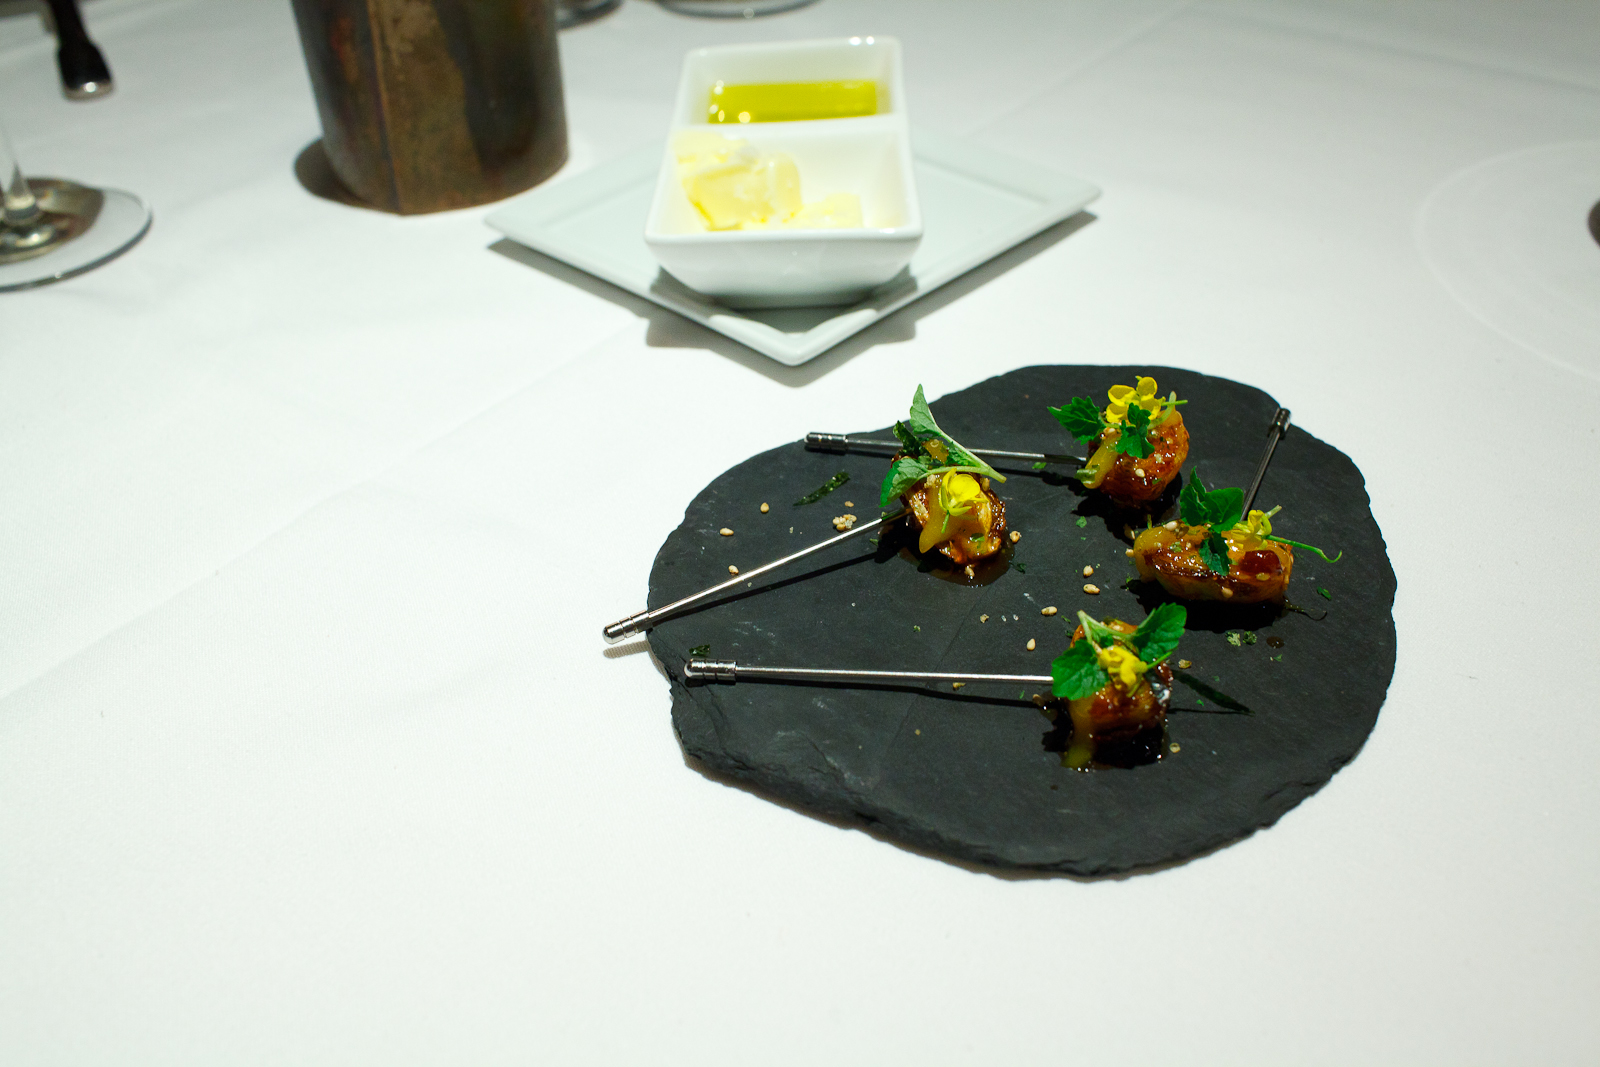 Amuse Bouche 1: General Tsao's Brussels Sprouts